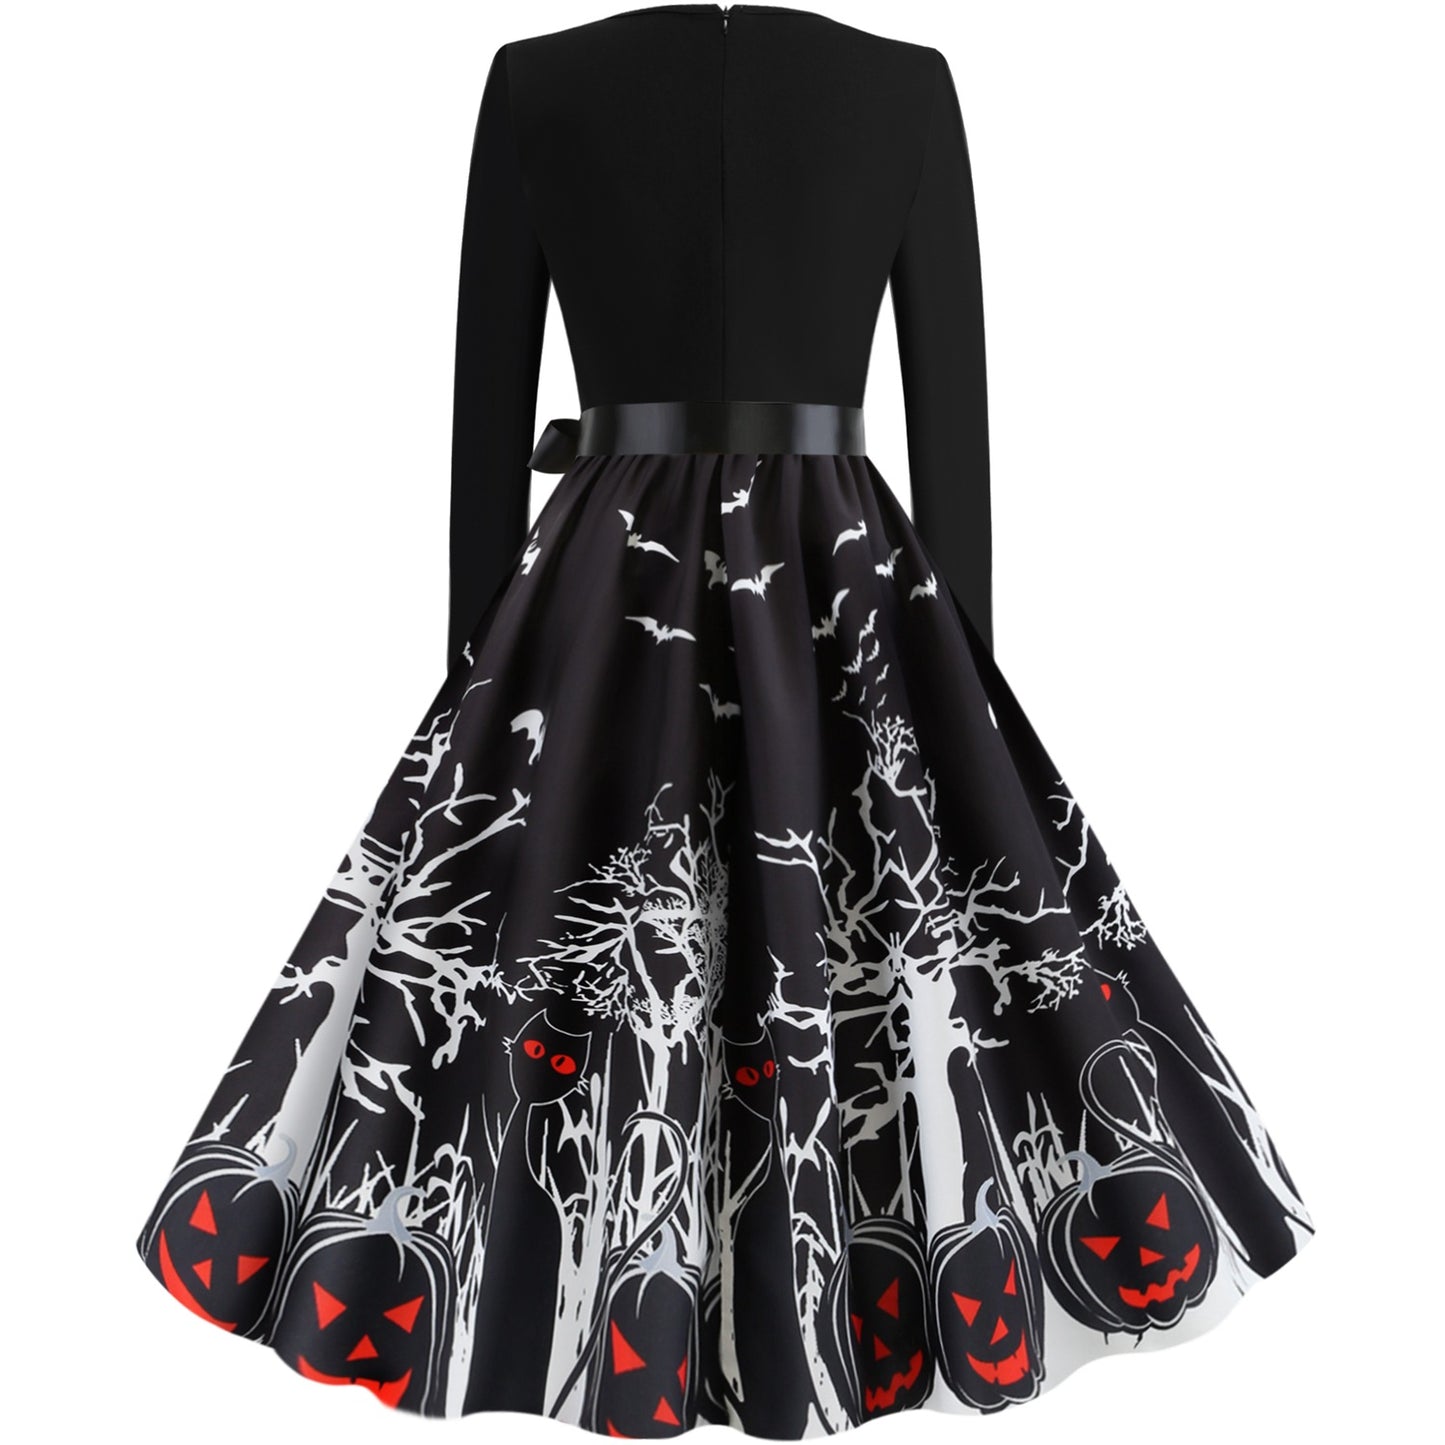 A Maramalive™ Halloween Retro Floral Print Swing Dress with pumpkins on it.